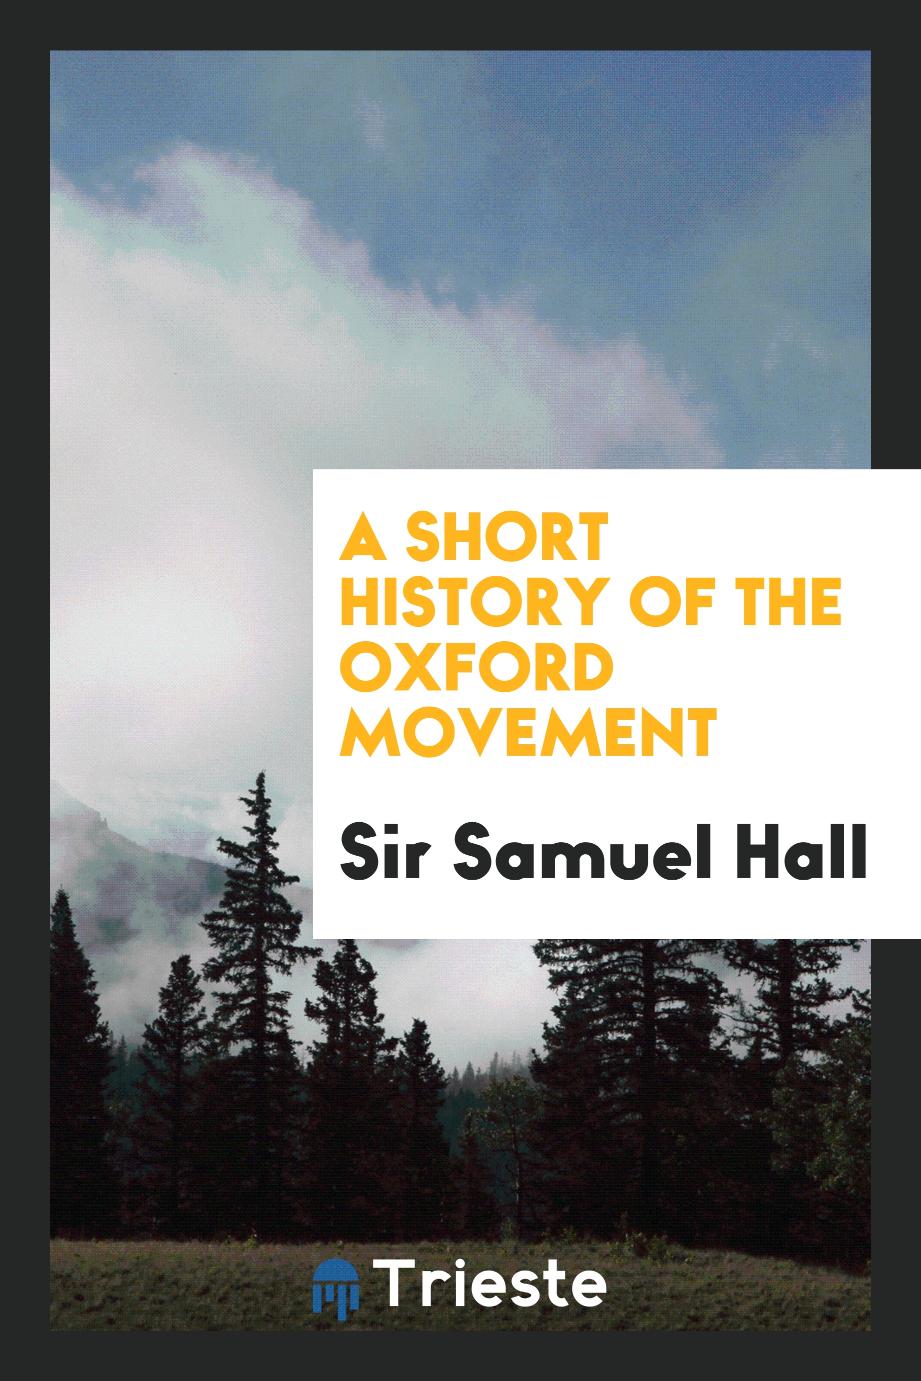 A short history of the Oxford movement